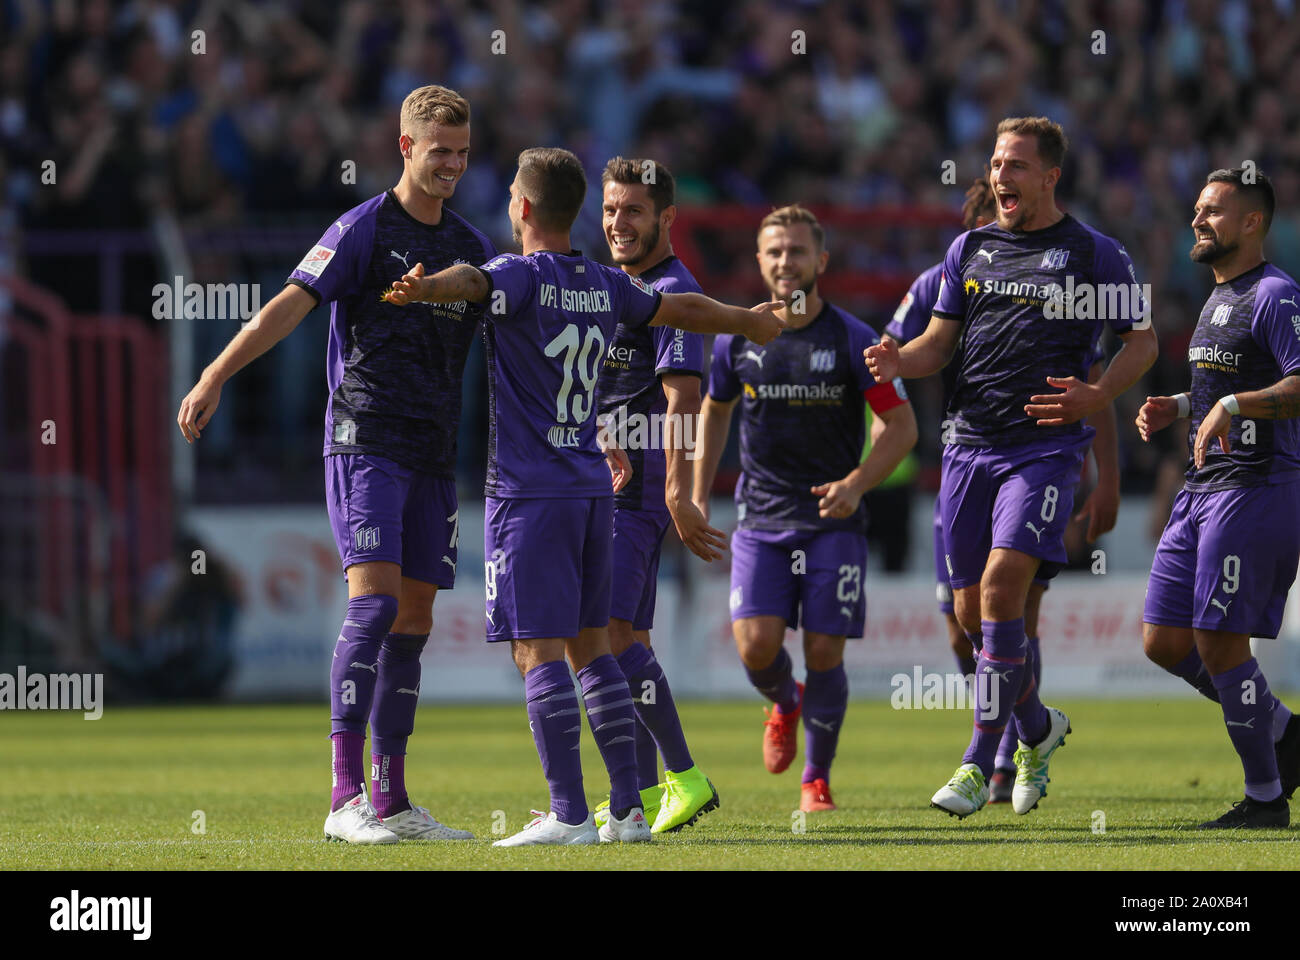 22 September 2019, Lower Saxony, Osnabrück: Soccer: 2nd Bundesliga, VfL Osnabrück - FC St. Pauli, 7th matchday in the stadium at the Bremer Brücke. Osnabrück goal scorer Kevin Wolze (2nd from left) celebrates his 1-0 goal with Joost van Aken (l-r), Bashkim Ajdini, David Blacha, Ulrich Taffertshofer and Marcos Alvarez. Photo: Friso Gentsch/dpa - IMPORTANT NOTE: In accordance with the requirements of the DFL Deutsche Fußball Liga or the DFB Deutscher Fußball-Bund, it is prohibited to use or have used photographs taken in the stadium and/or the match in the form of sequence images and/or video-li Stock Photo